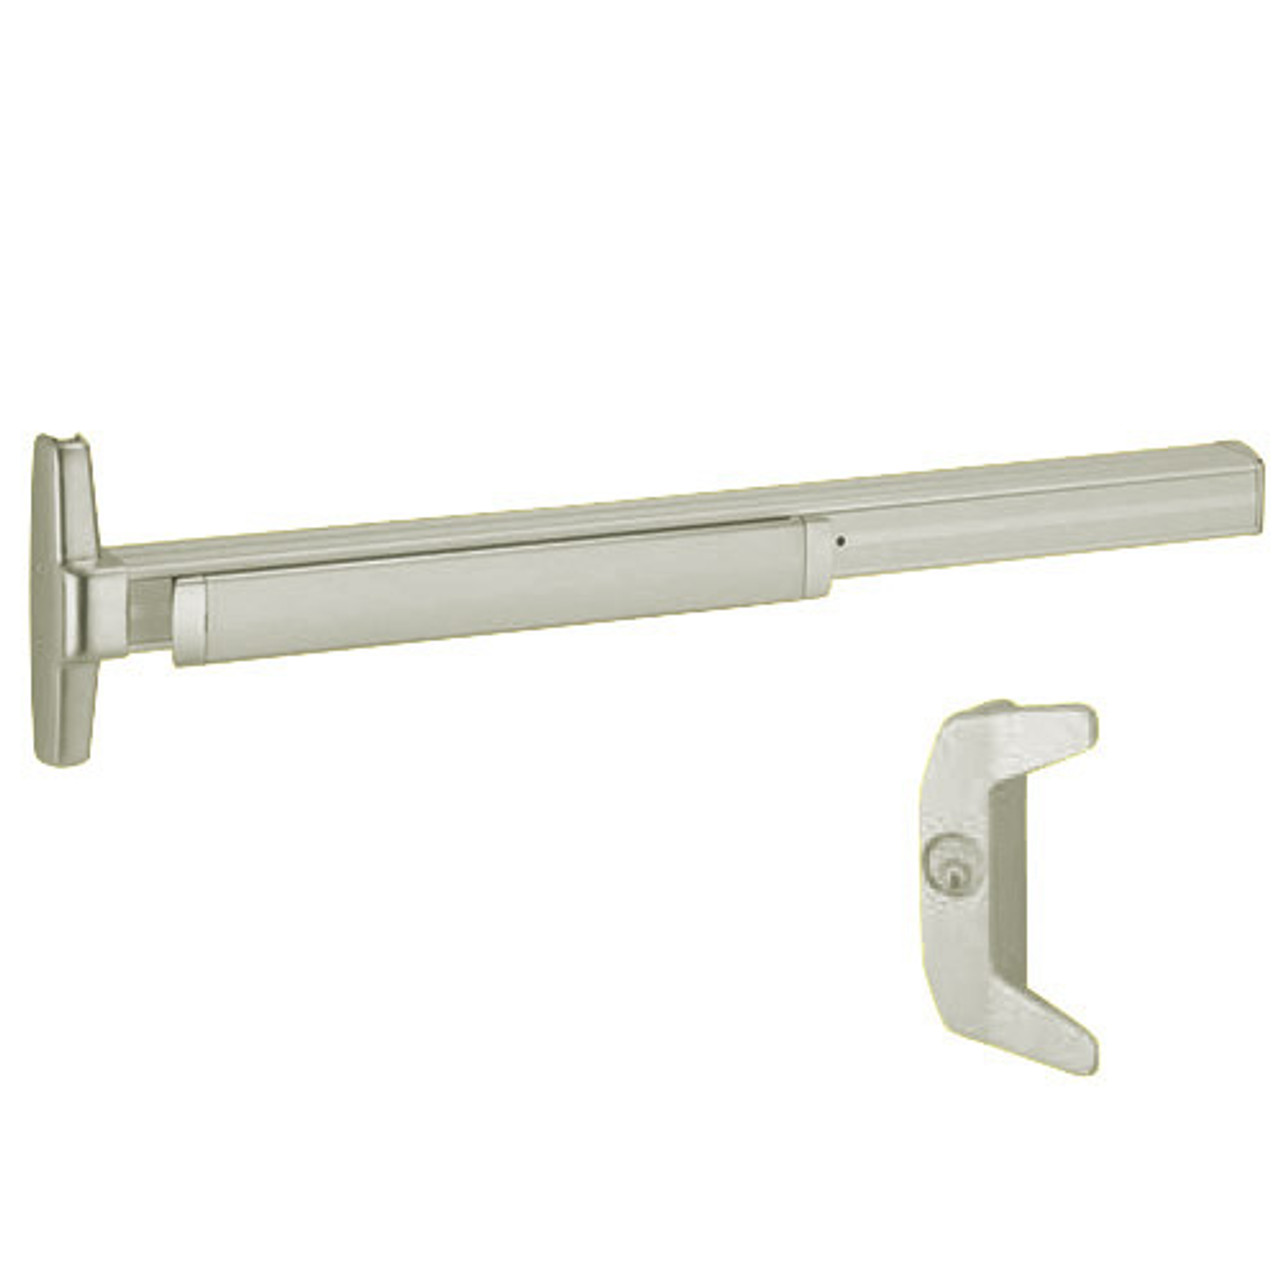 3548A-NL-RHR-F-US15-3 Von Duprin 3548A Series with 386NL Night Latch Fire-Rated Exit Device for Hollow Metal Doors in Satin Nickel